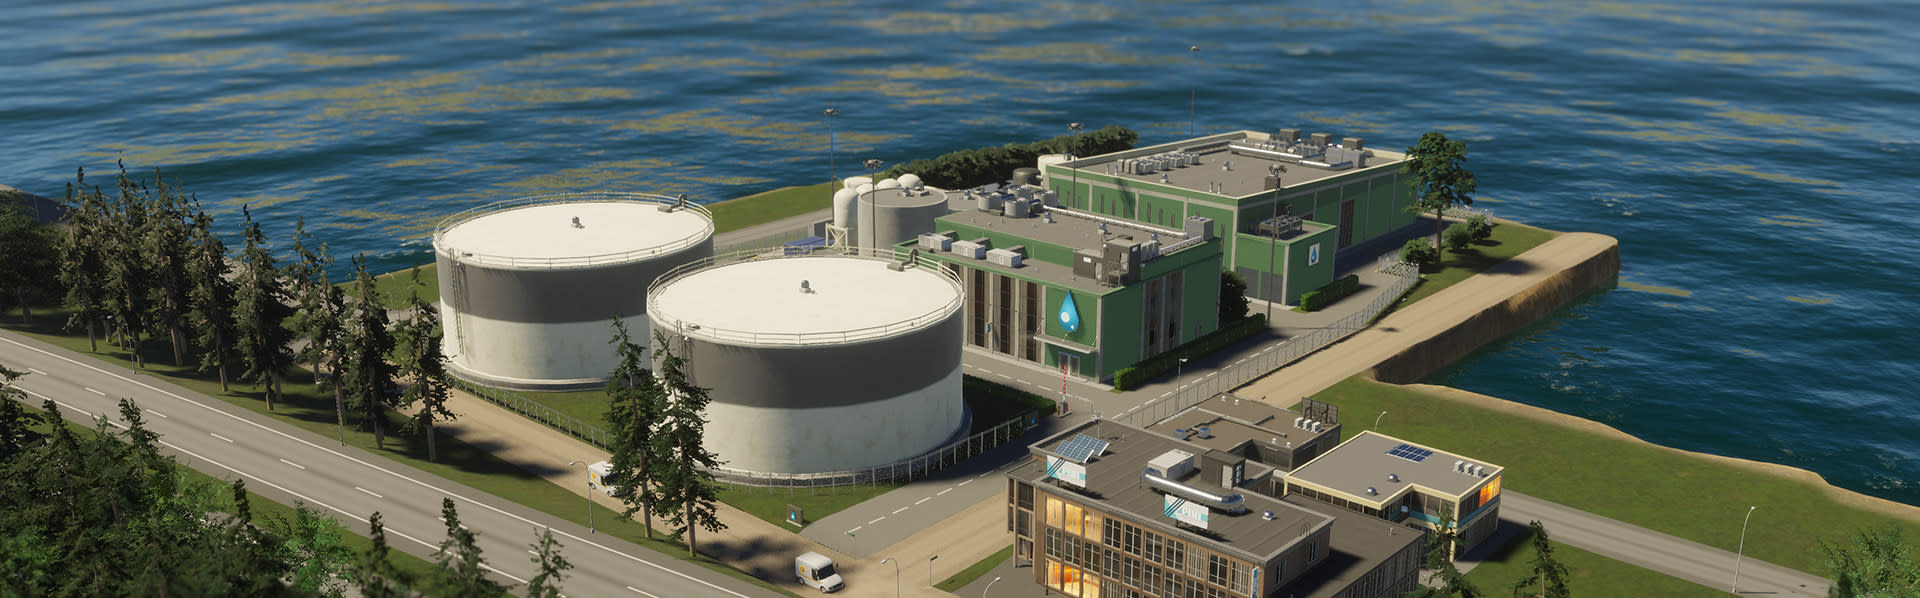 cities-skylines-ii-feature-6-23 Advanced water